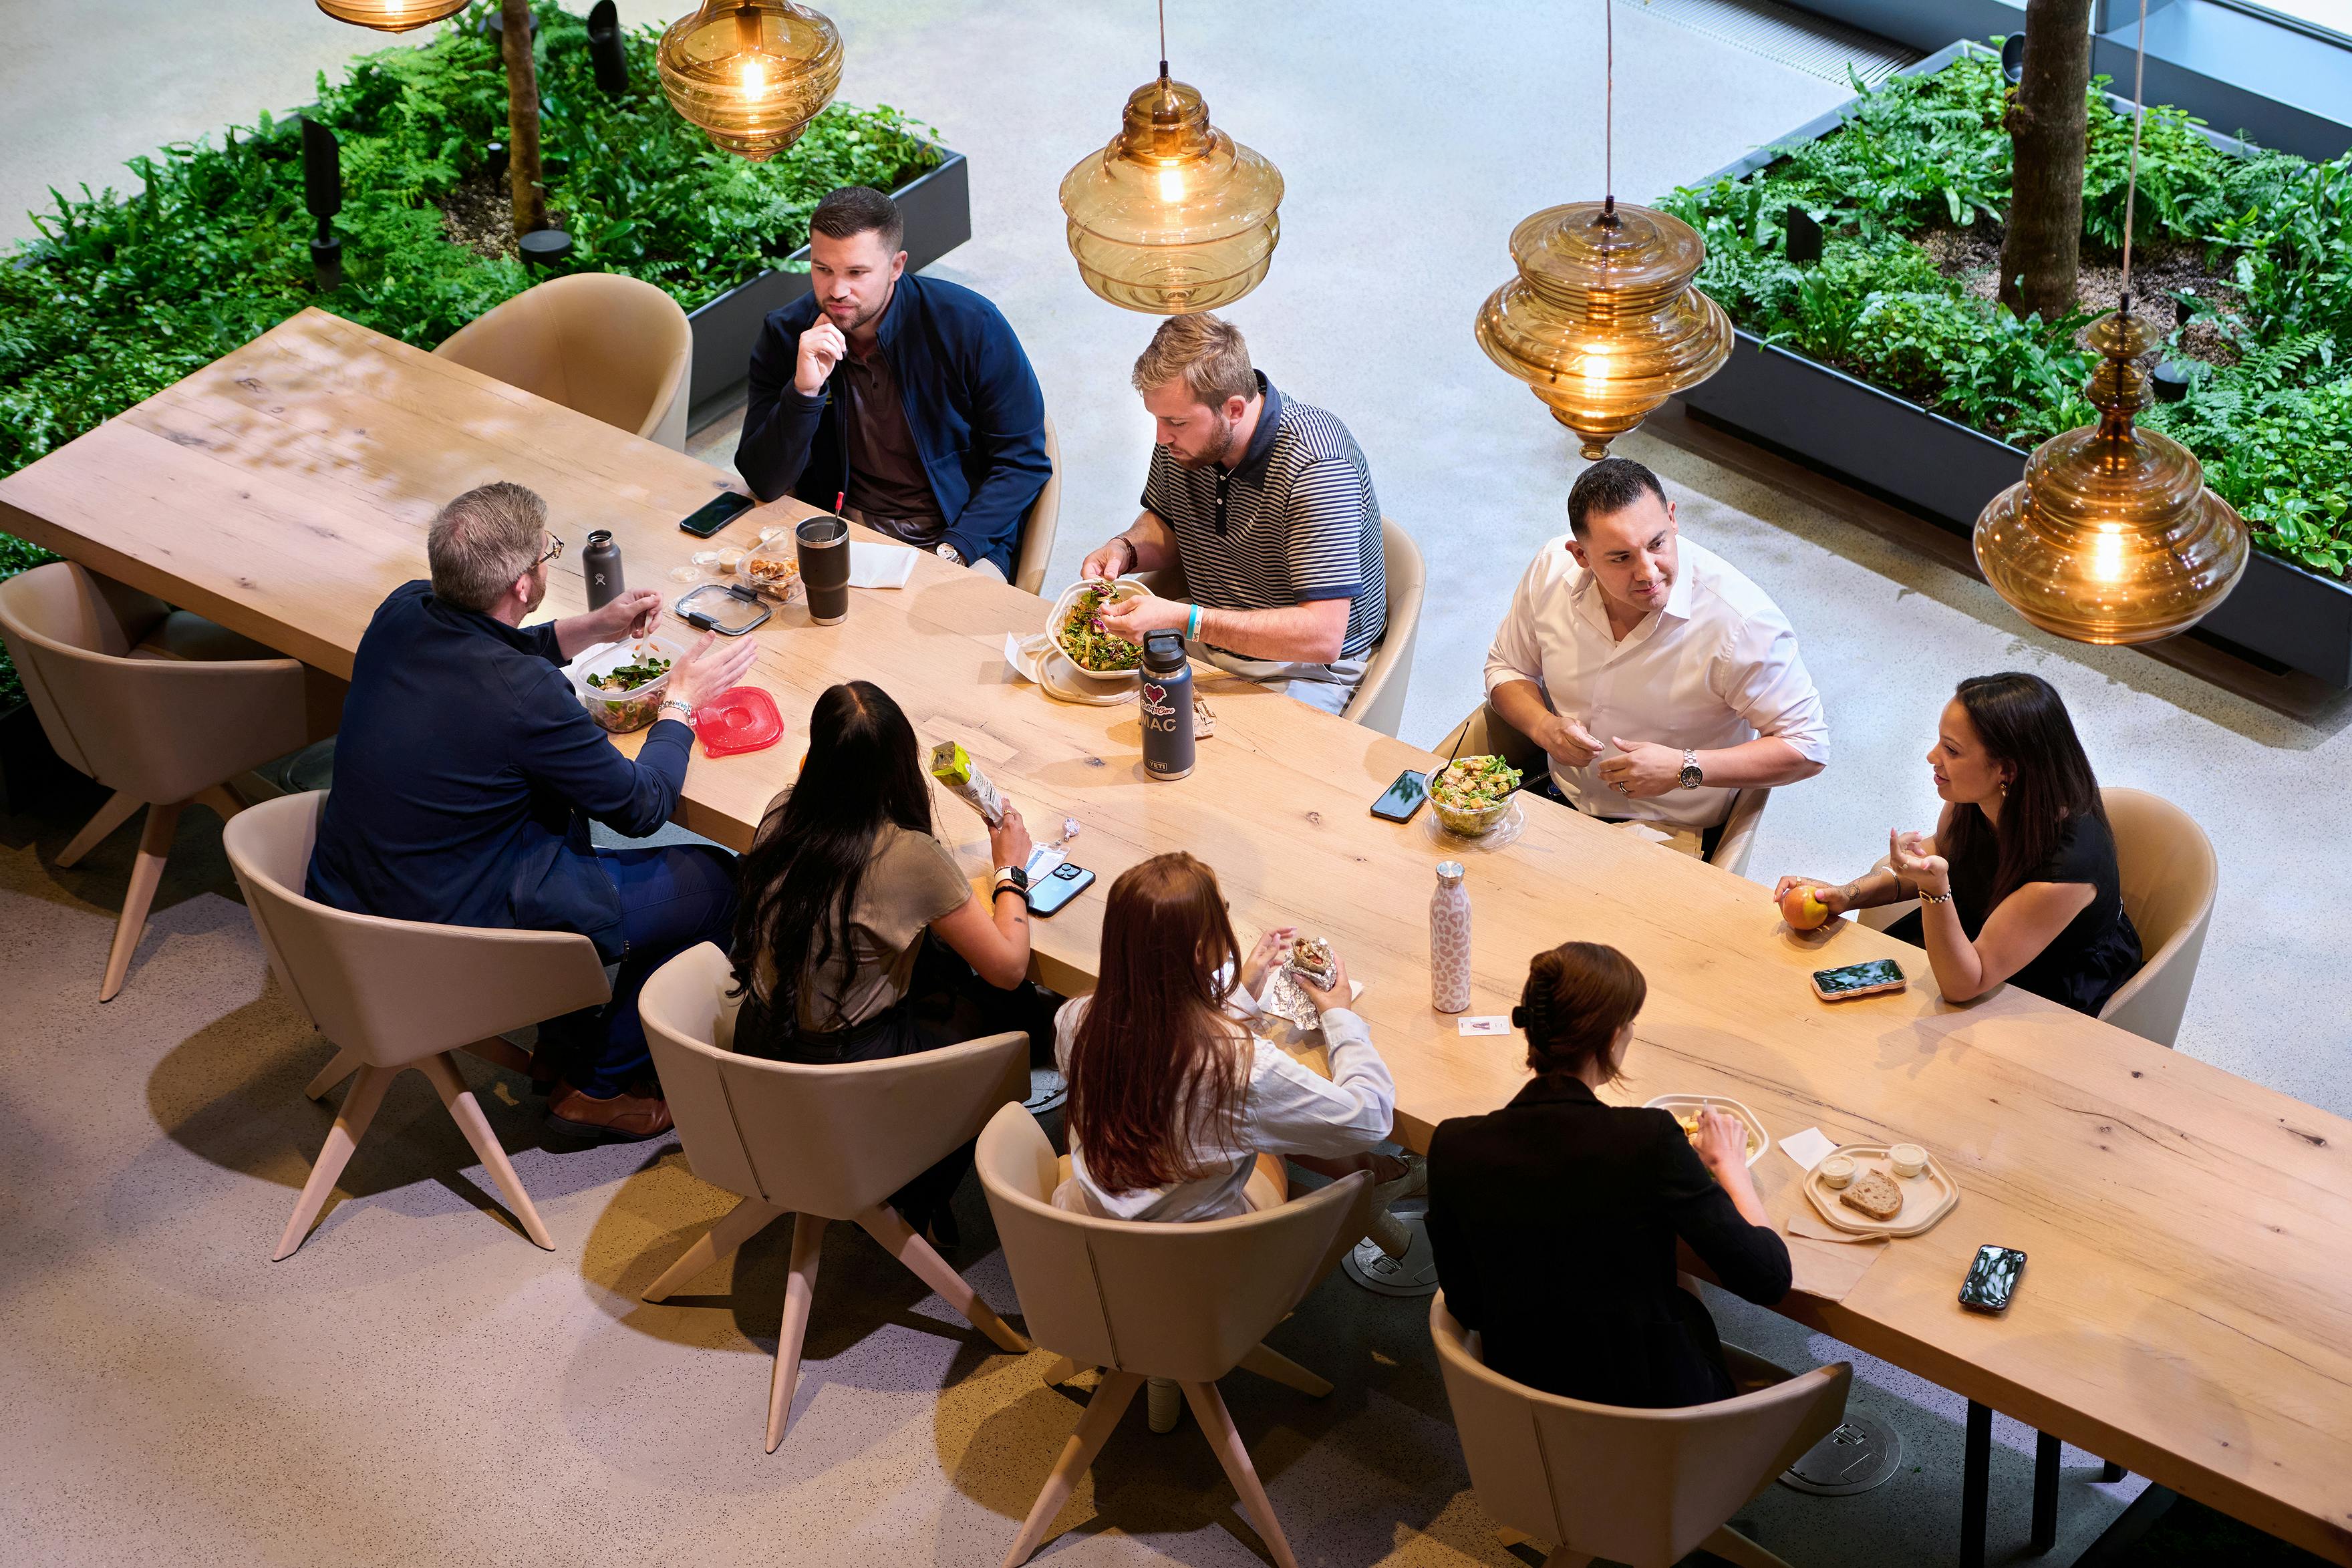 A group of employees gathers around a table in the office lobby for lunch